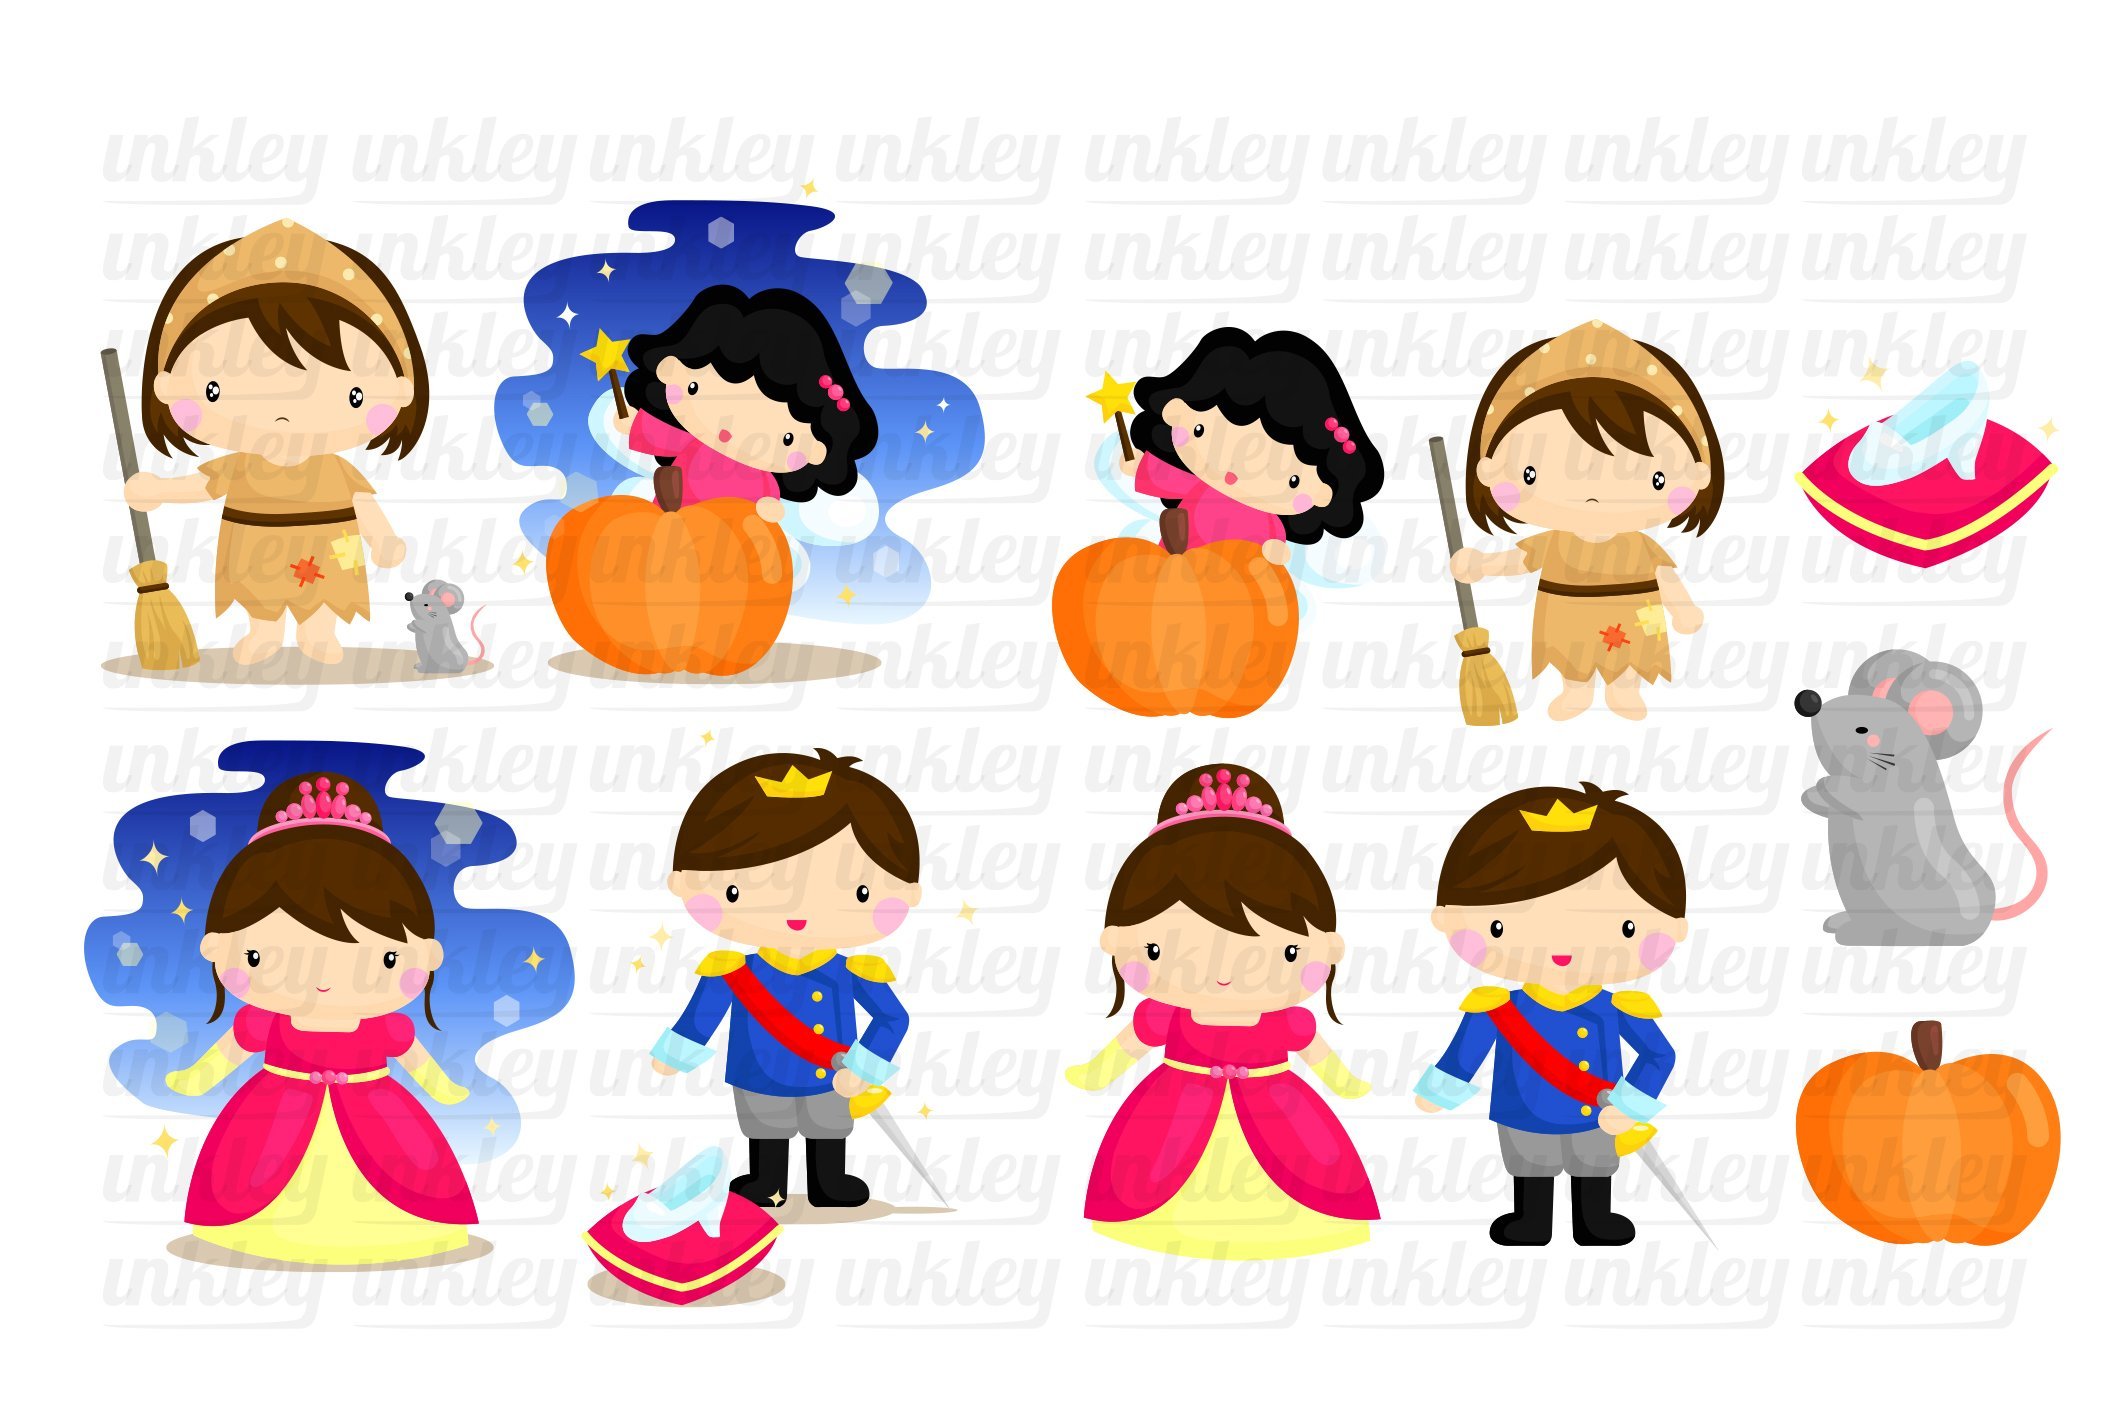 Cinderella Story Fairytale Clipart preview image.